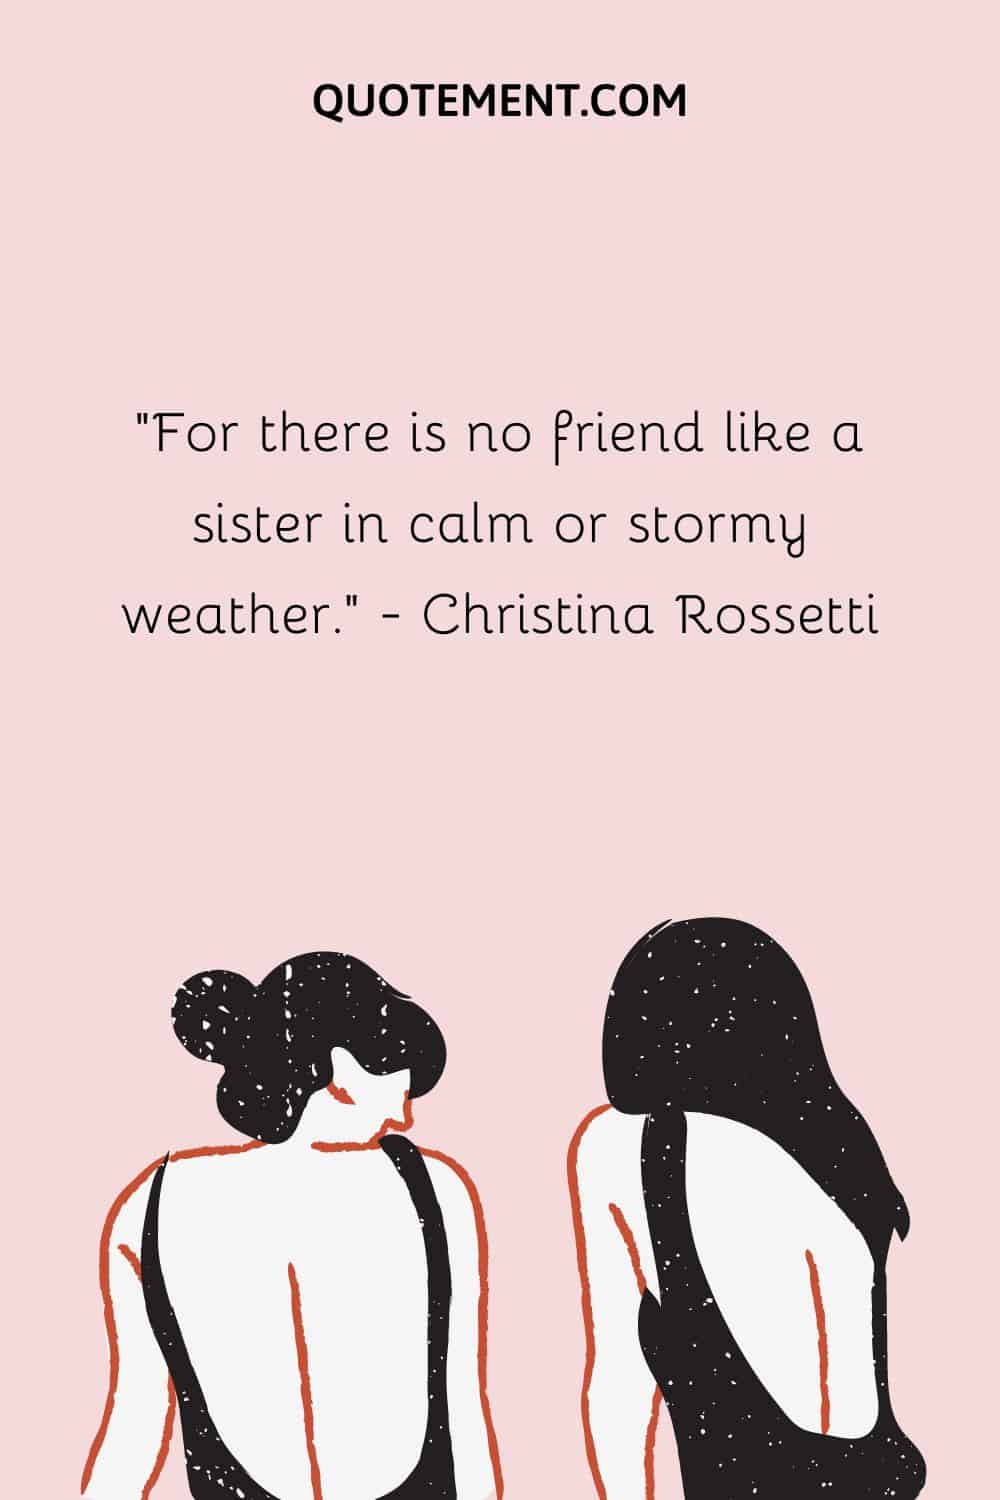 For there is no friend like a sister in calm or stormy weather